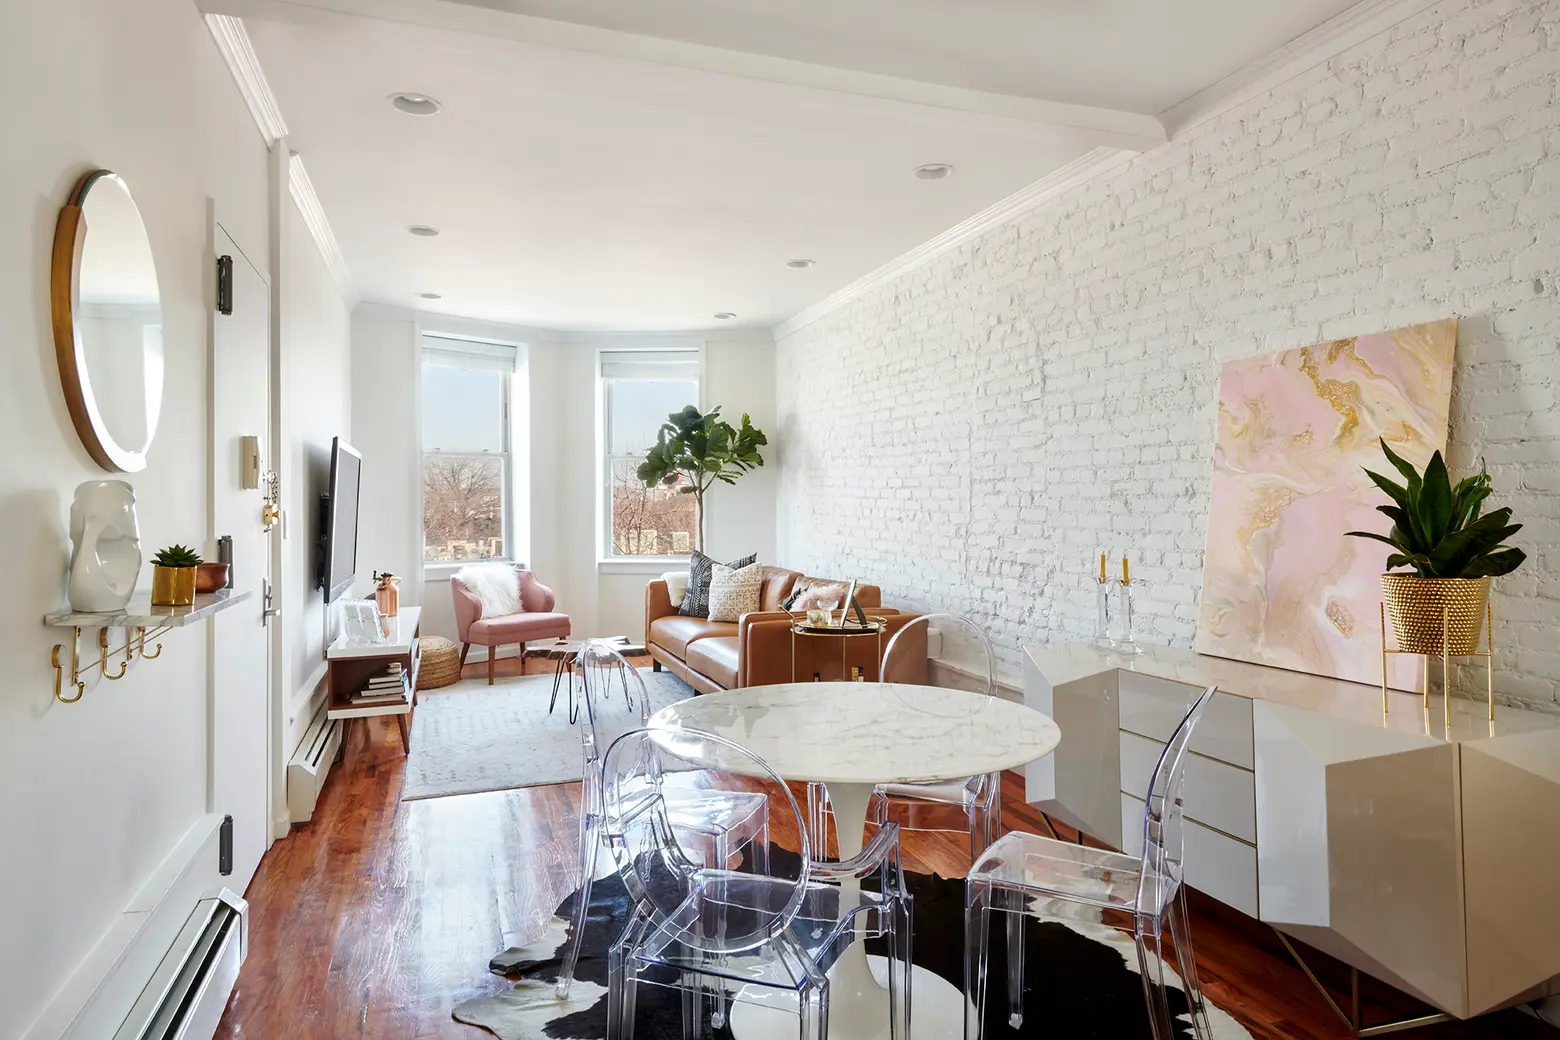 Crown Heights condo is a calming two-bedroom home for under $1M